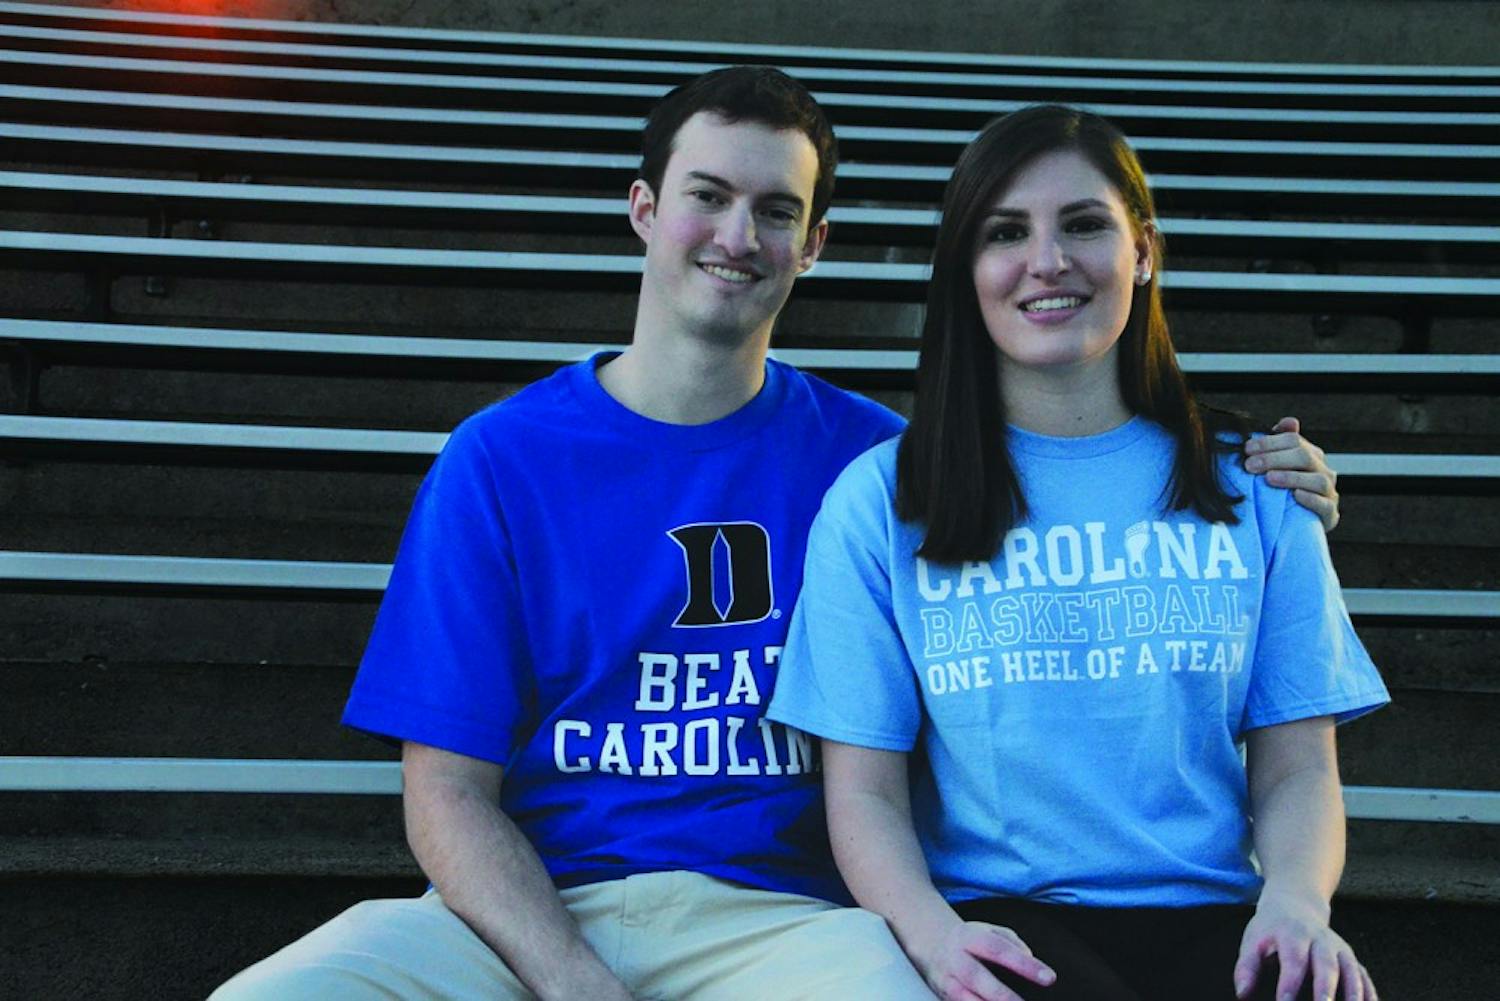 Stephanie DeFazio, a senior, and Joe Hendricks, a first-year law student at Duke University, on the bleachers at Fetzer Field. DeFazio and Hendricks met at He's Not Here in September.